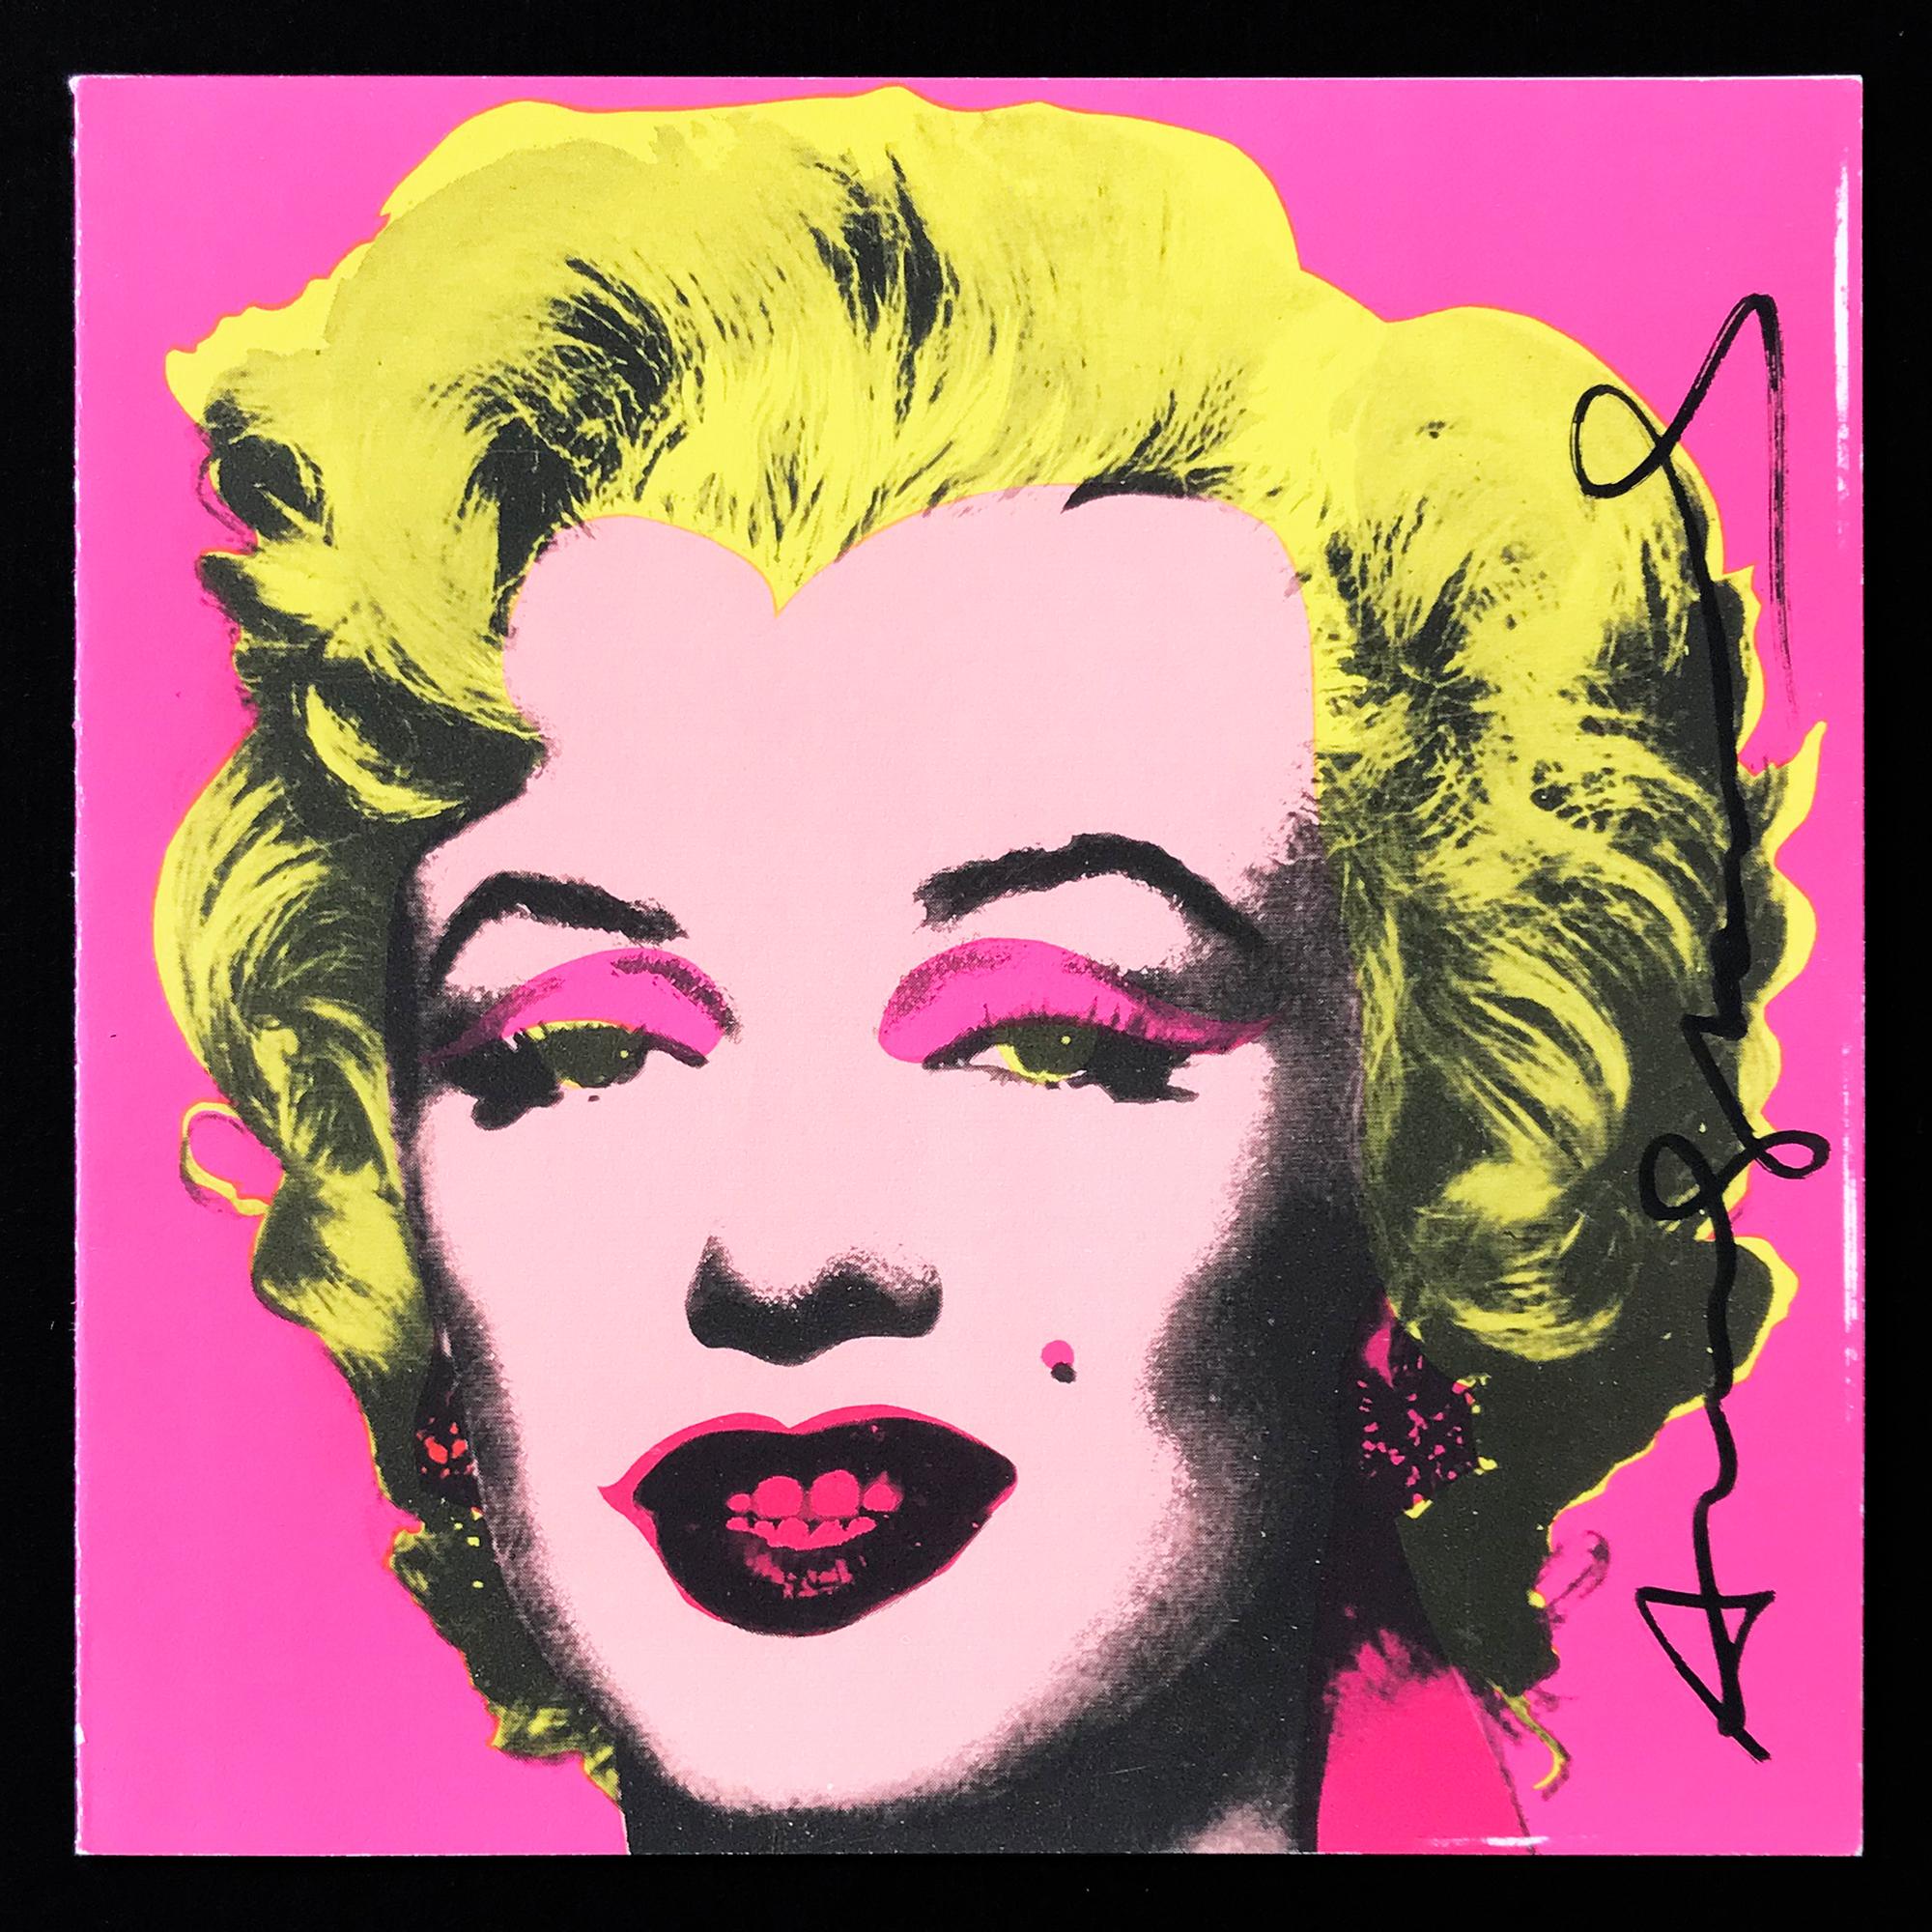 Marilyn, Castelli Graphics Invitation, Pop Art, American Artist, 20th Century - Print by (after) Andy Warhol